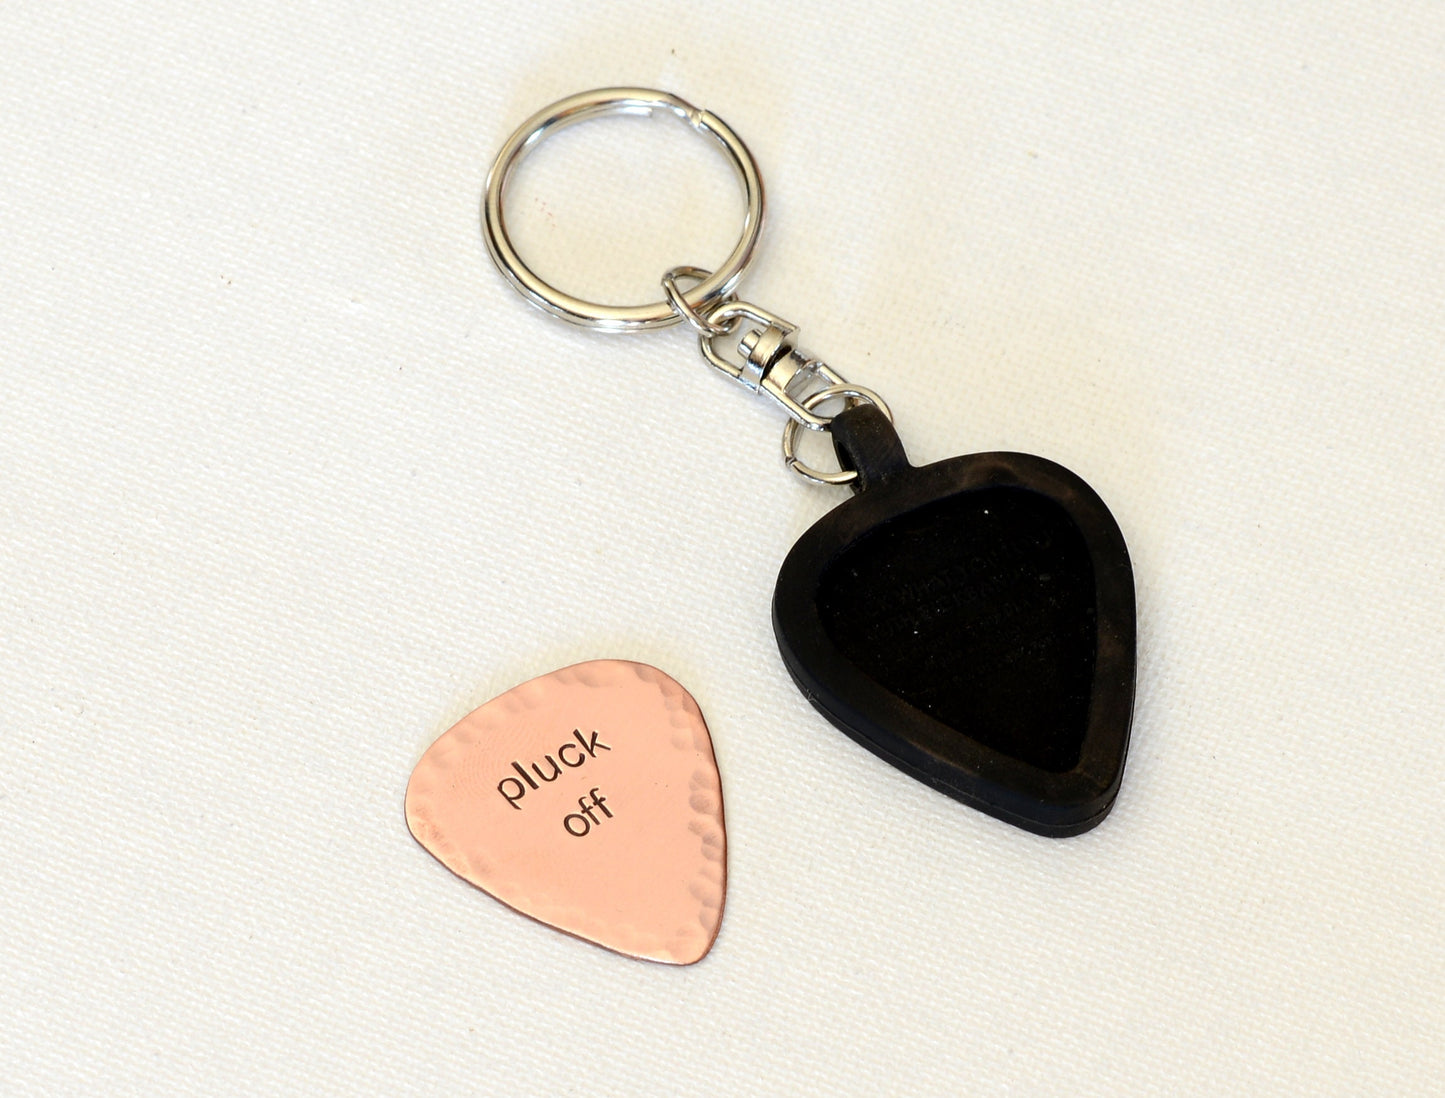 Pluck off copper guitar pick keychain with holder